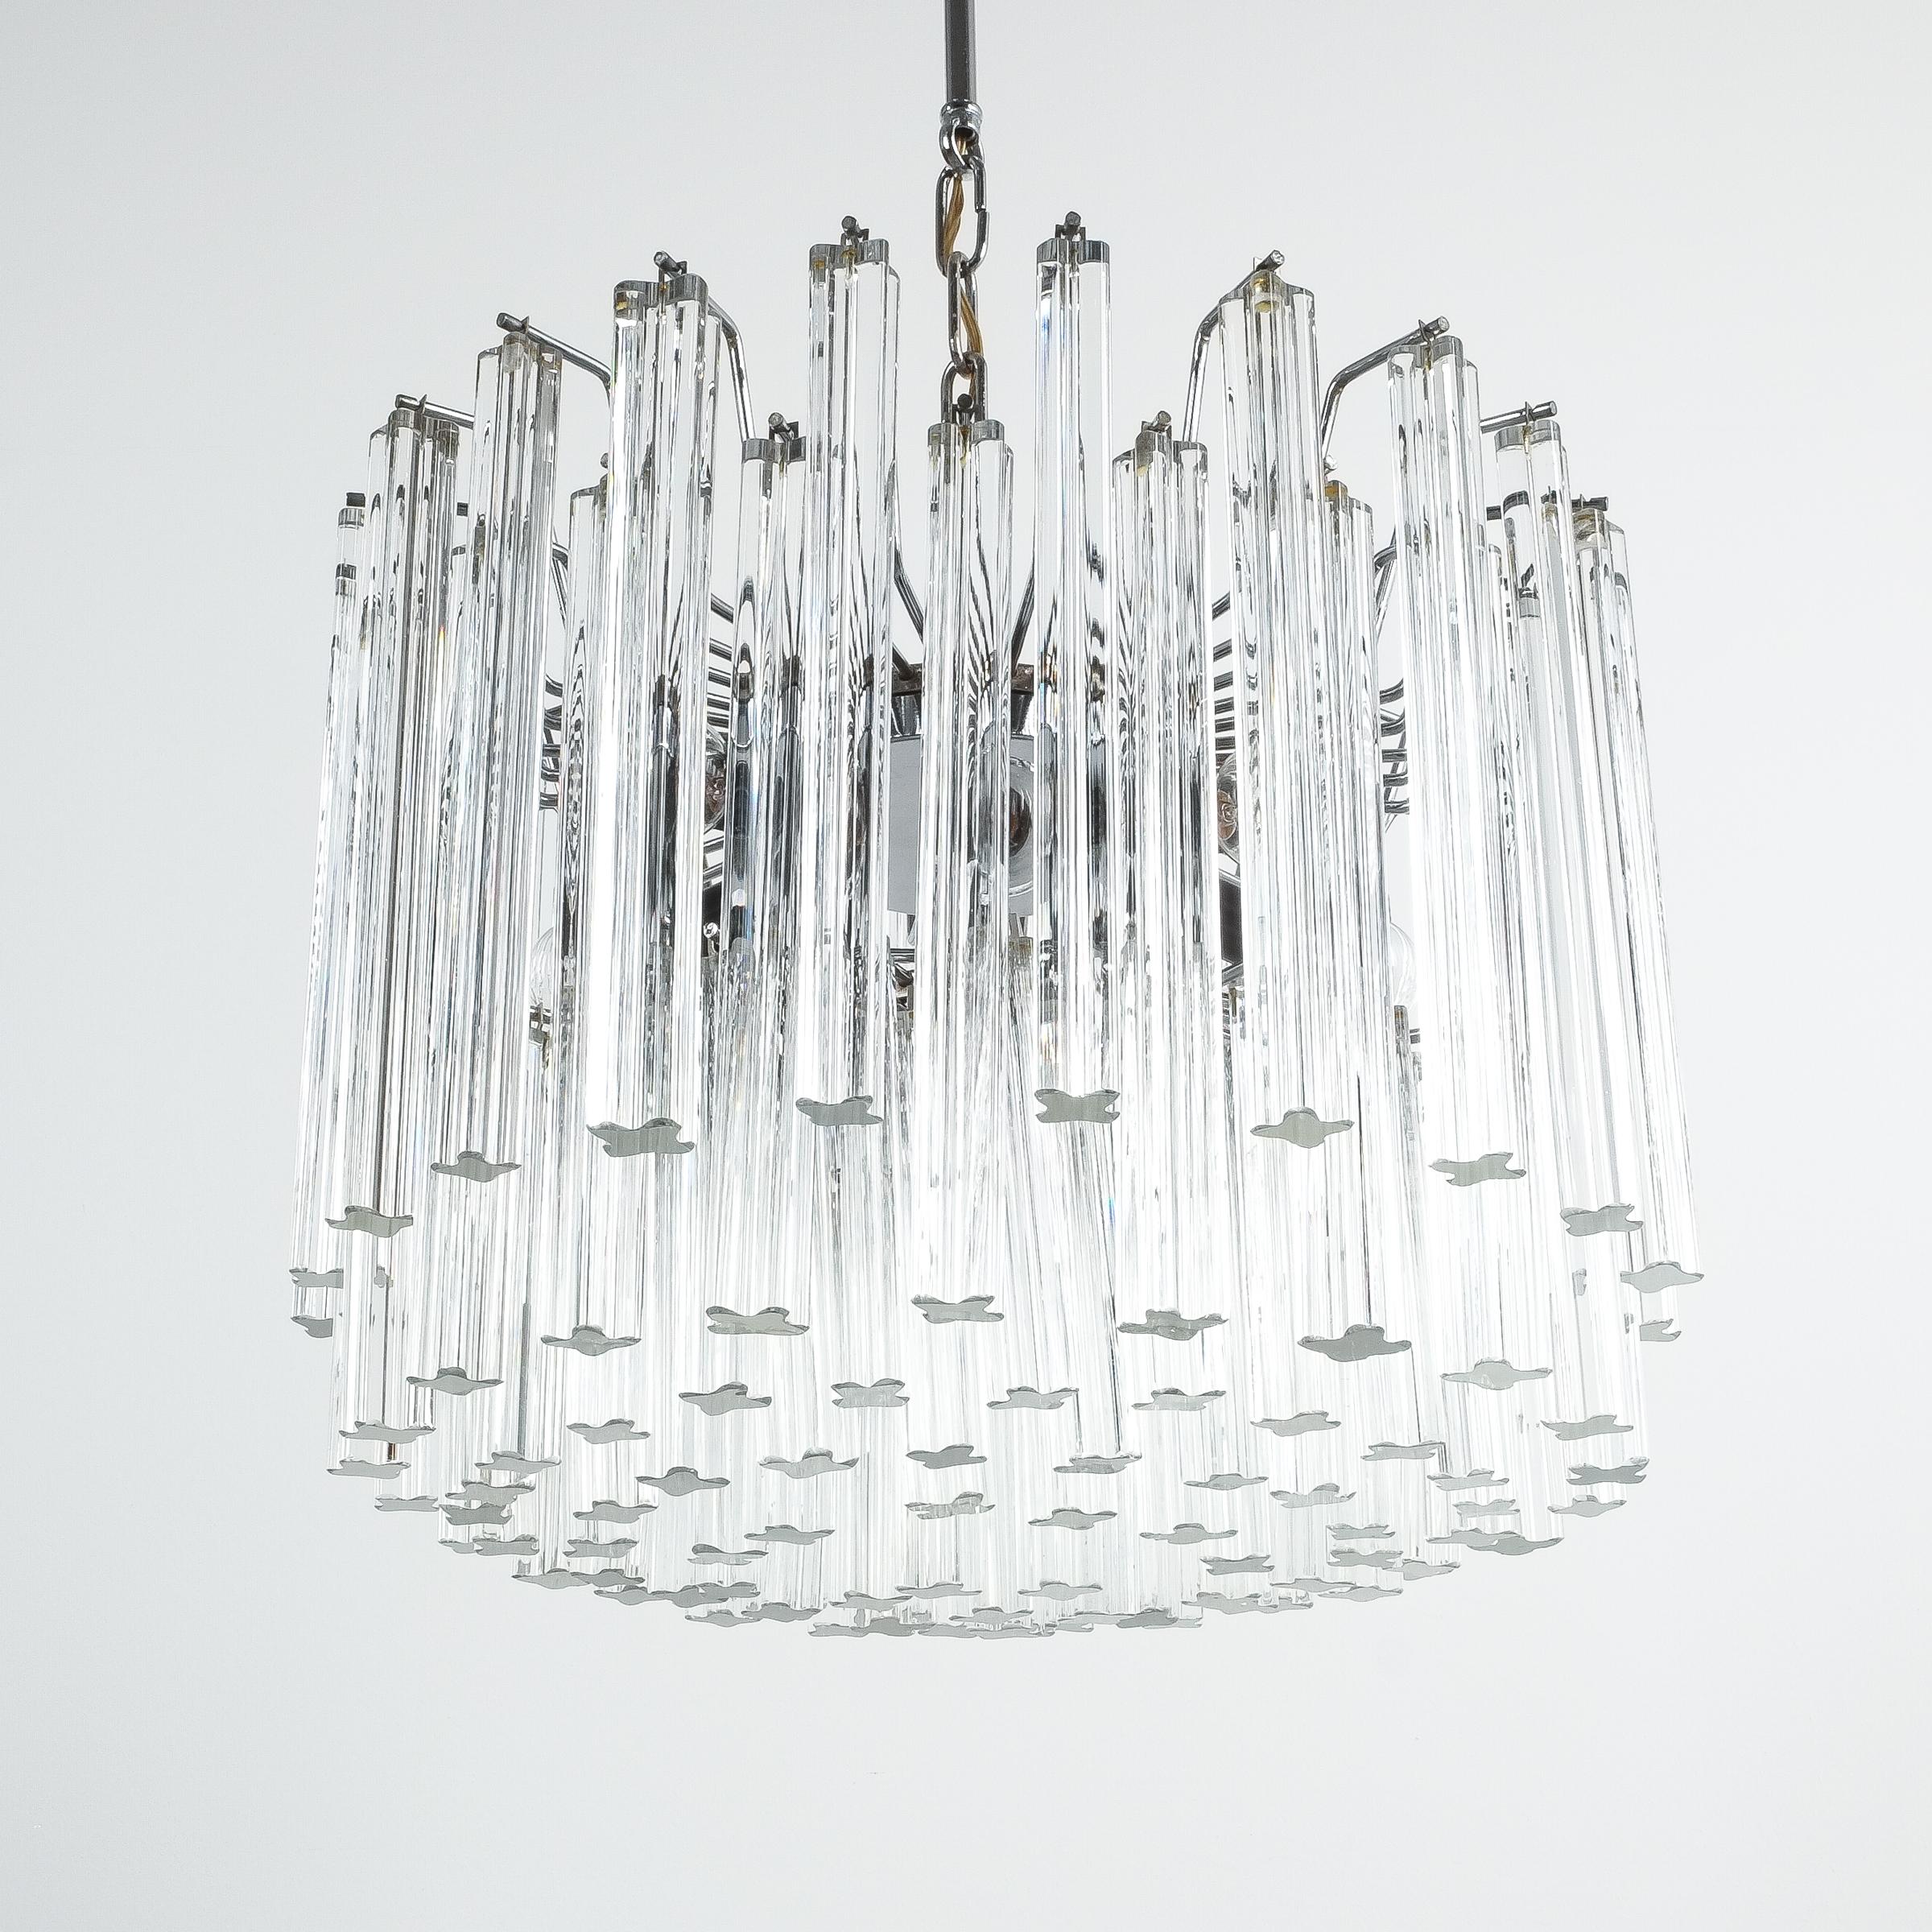 1 of 3 chandeliers comprised of a multitude of thick and smooth Murano glass bars (circa 100 glass pieces per light) priced individually. They are especially large in size measuring 19.5